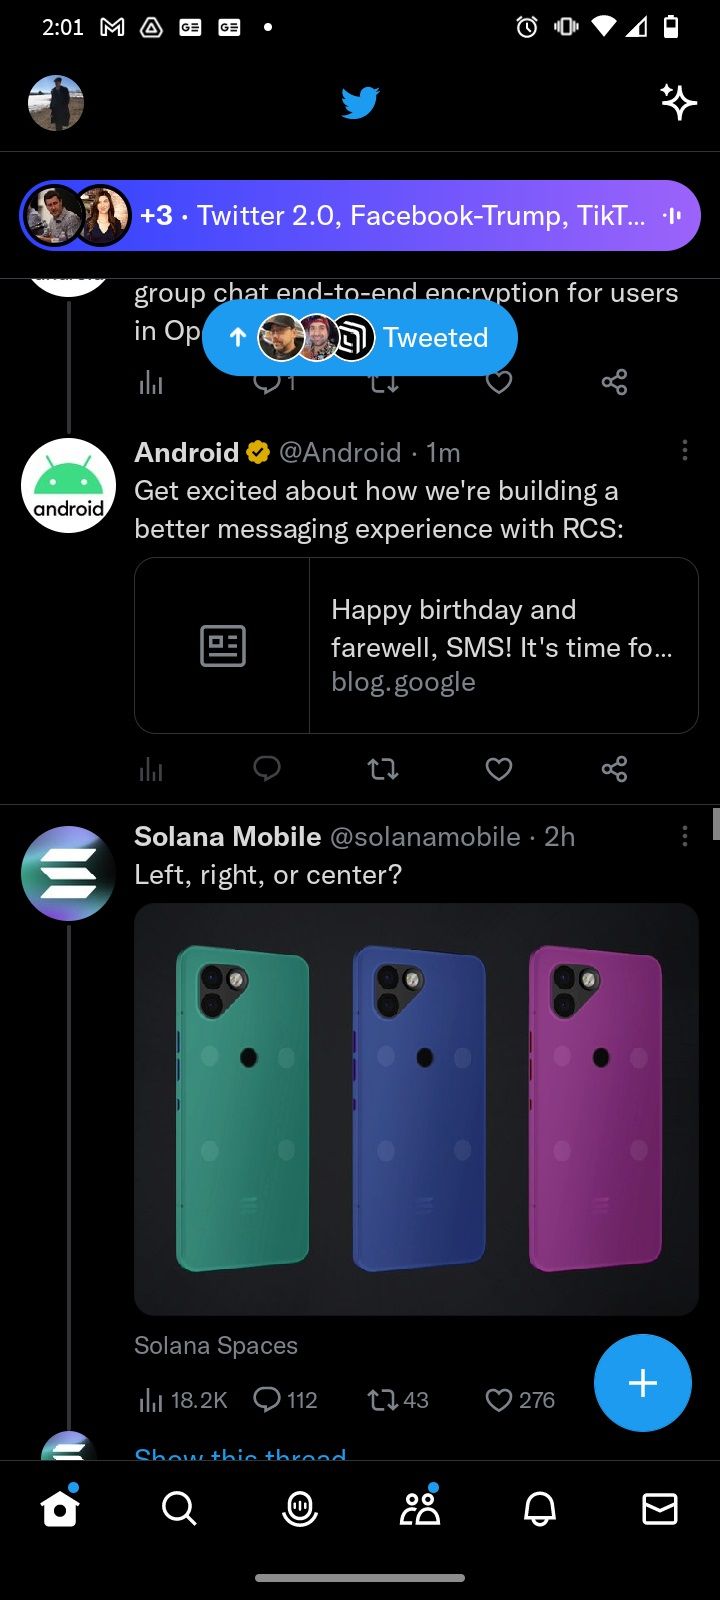 A live Twitter space displayed in the mobile feed